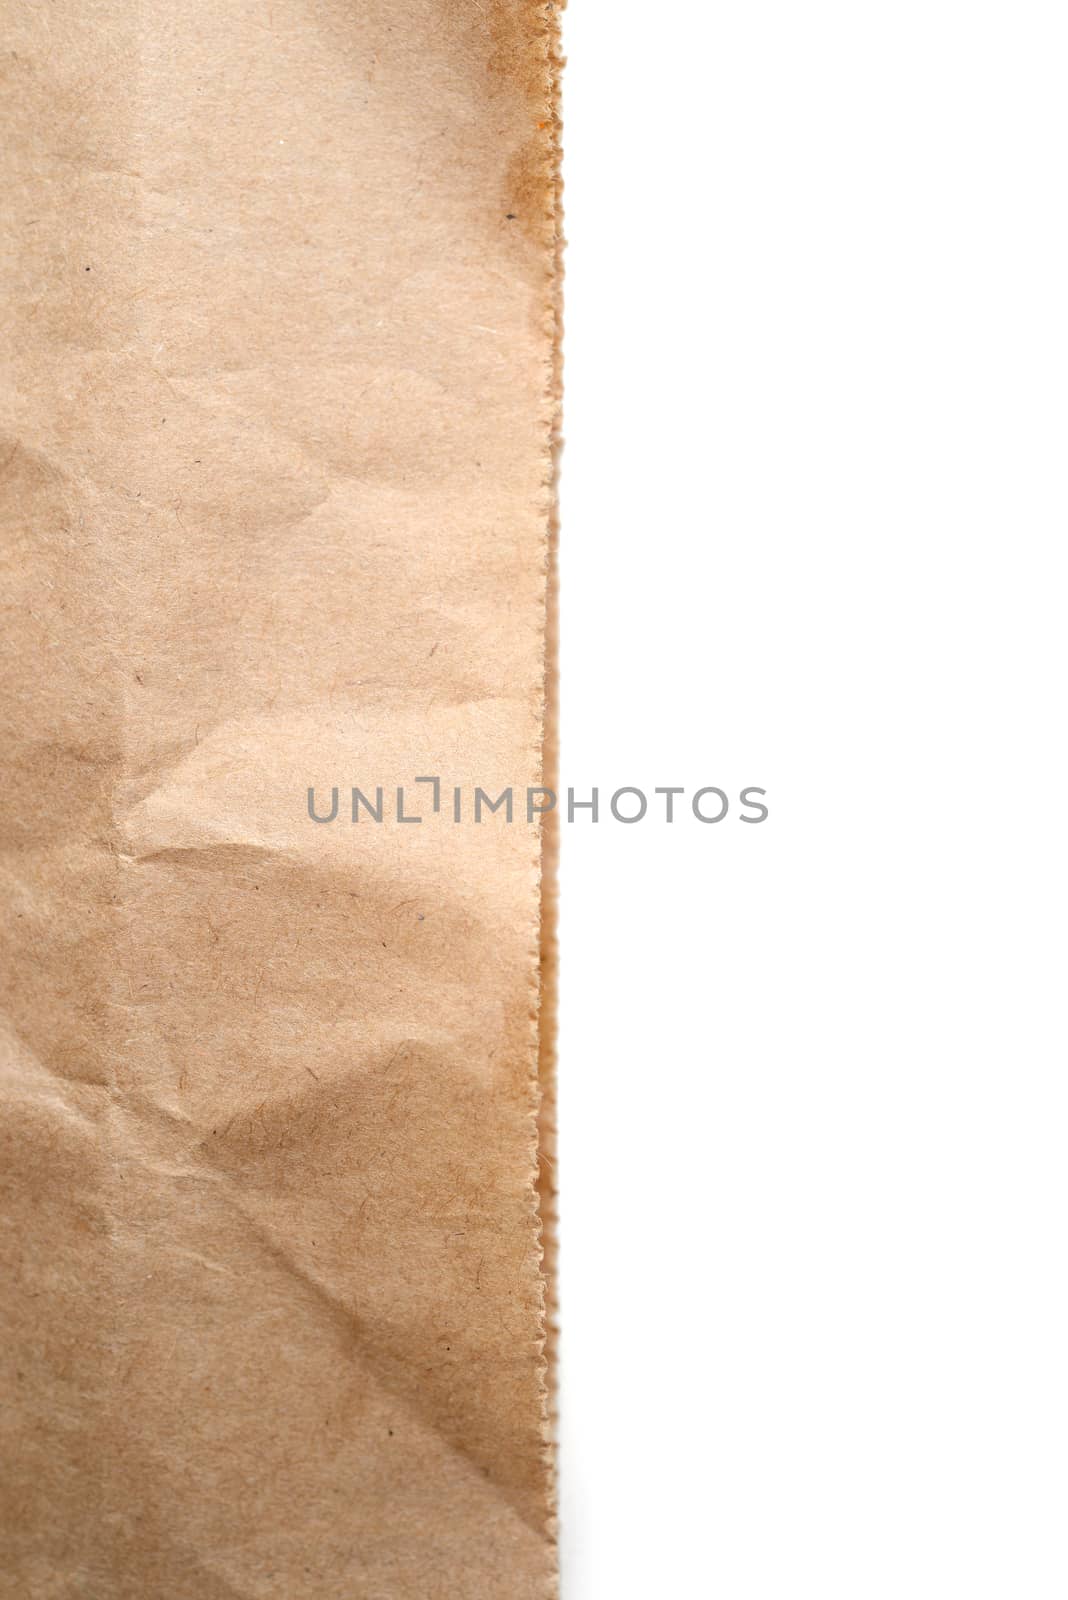 half brown paper with white background